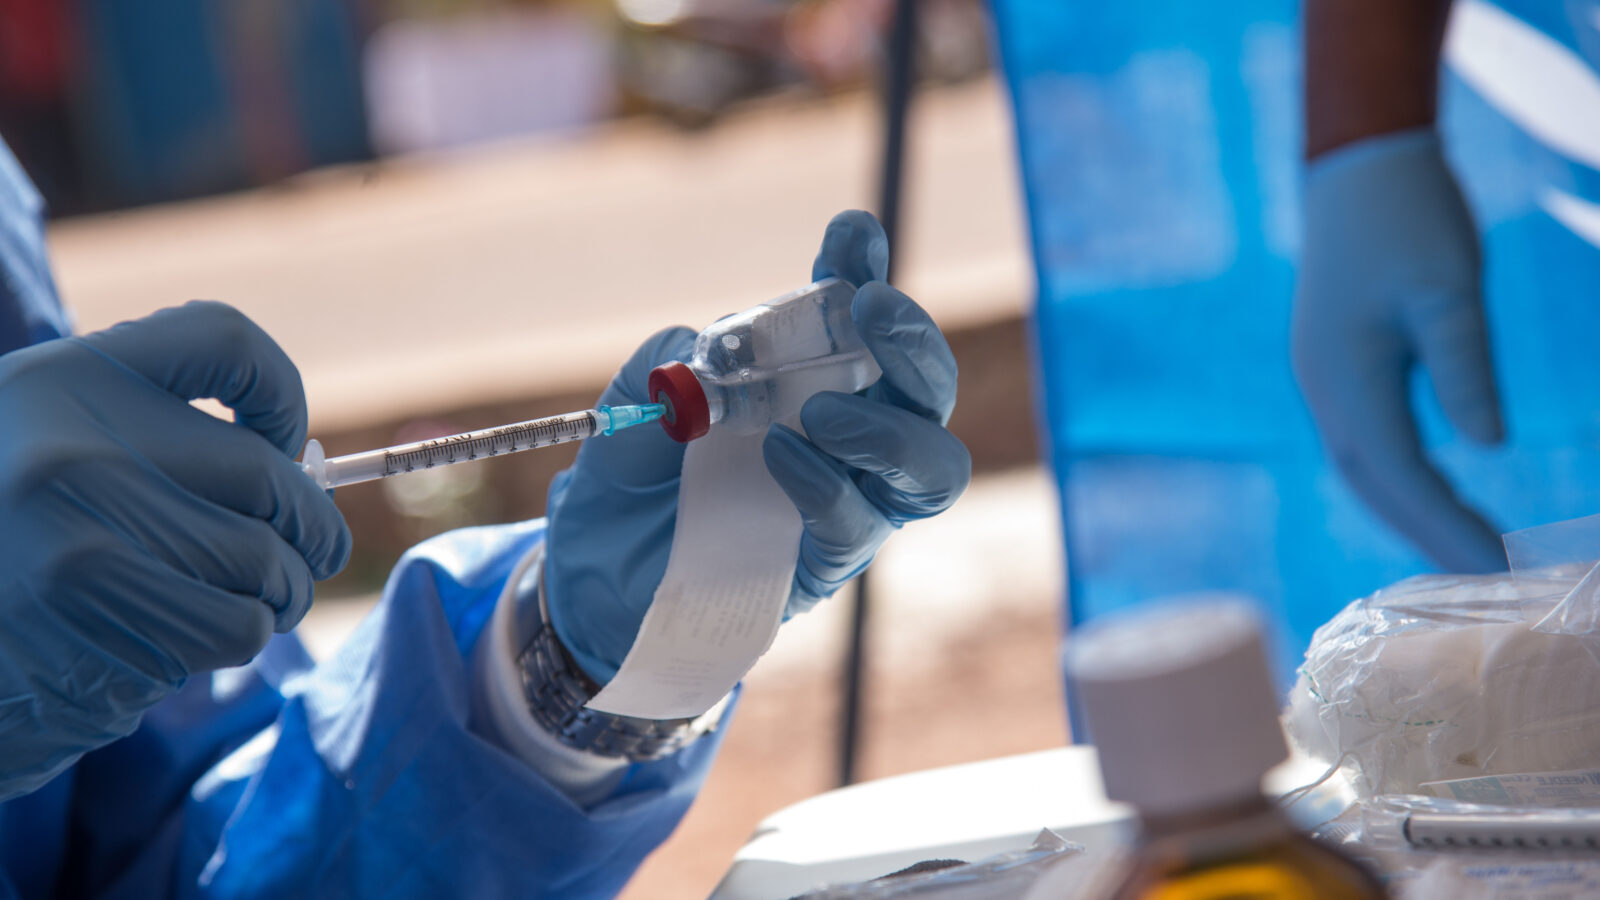 Nurses working with the WHO prepare to administer vaccines in Mbandaka, DRC, during the launch of an Ebola vaccination campaign in May 2018 (Junior D. Kannah:AFP:Getty Images)